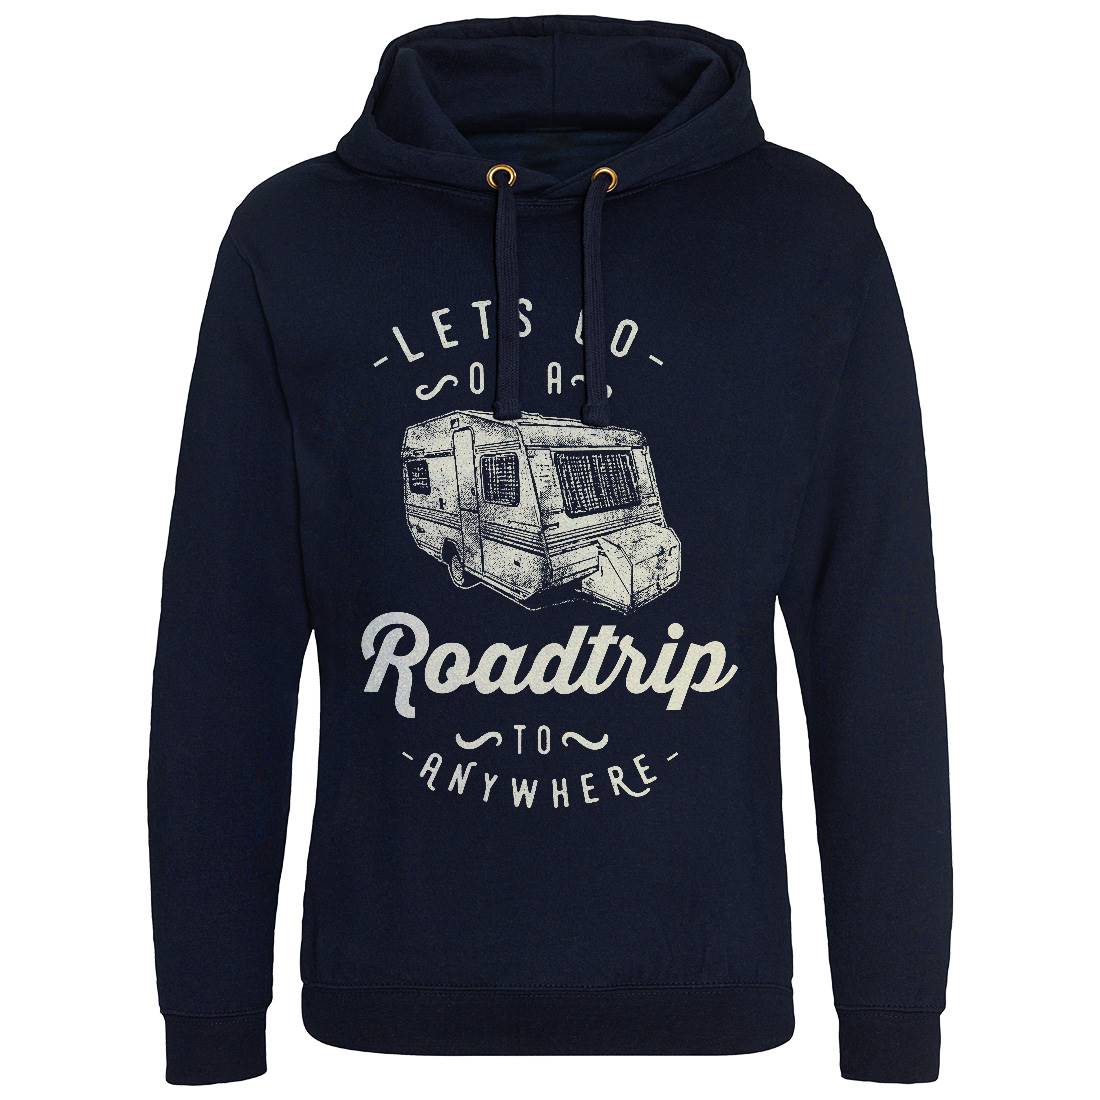 Let&#39;s Go On A Roadtrip Mens Hoodie Without Pocket Nature C957